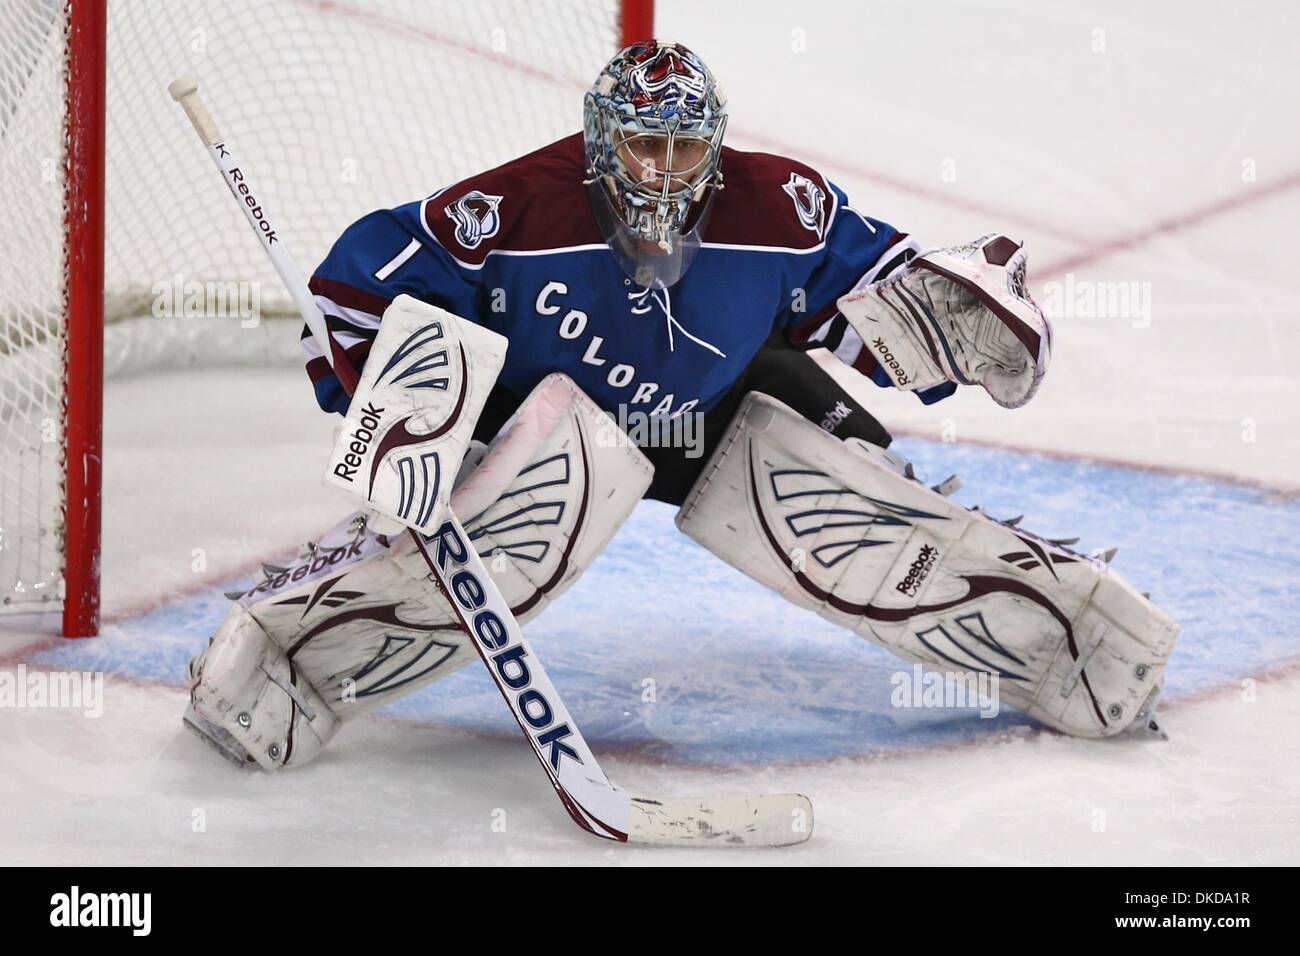 Avalanche goalie Semyon Varlamov excited about seeing Capitals again – The  Denver Post